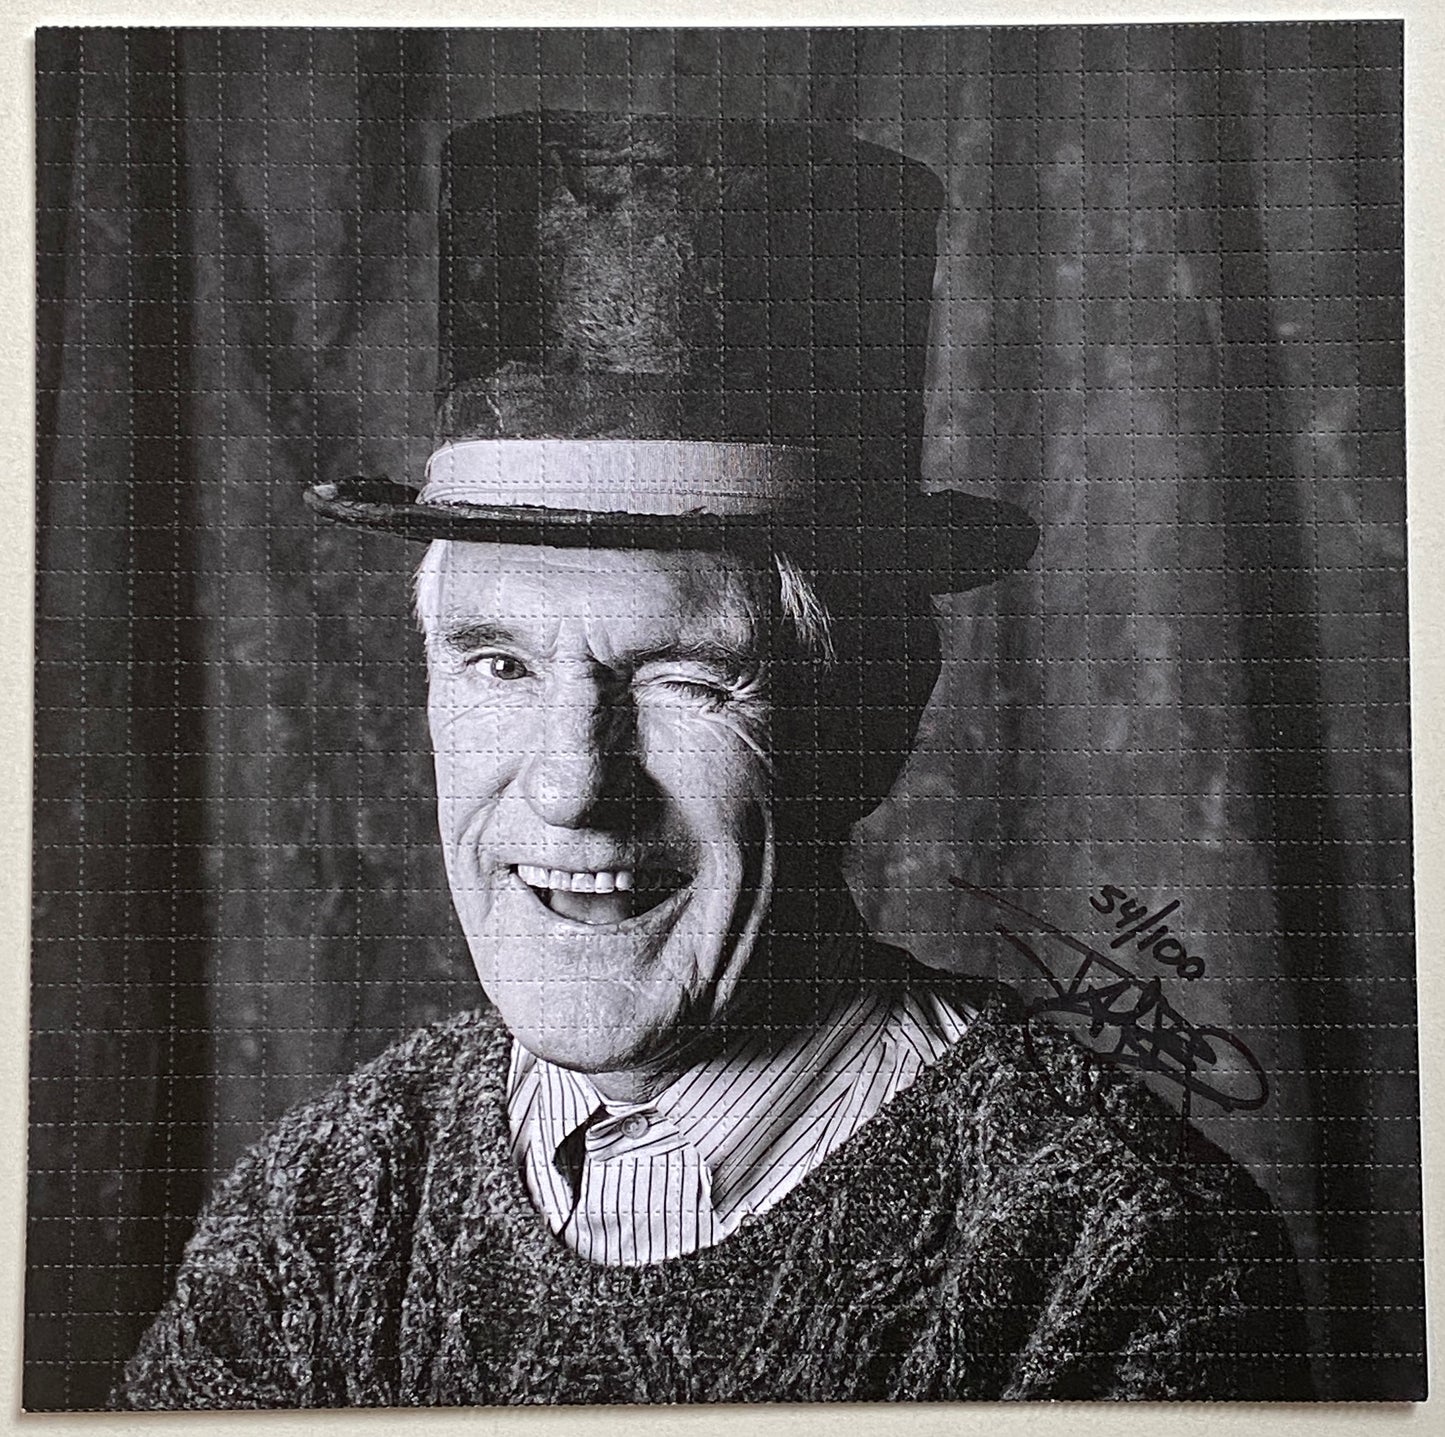 Tim Leary - Blotter Art Bicycle Day Sale!